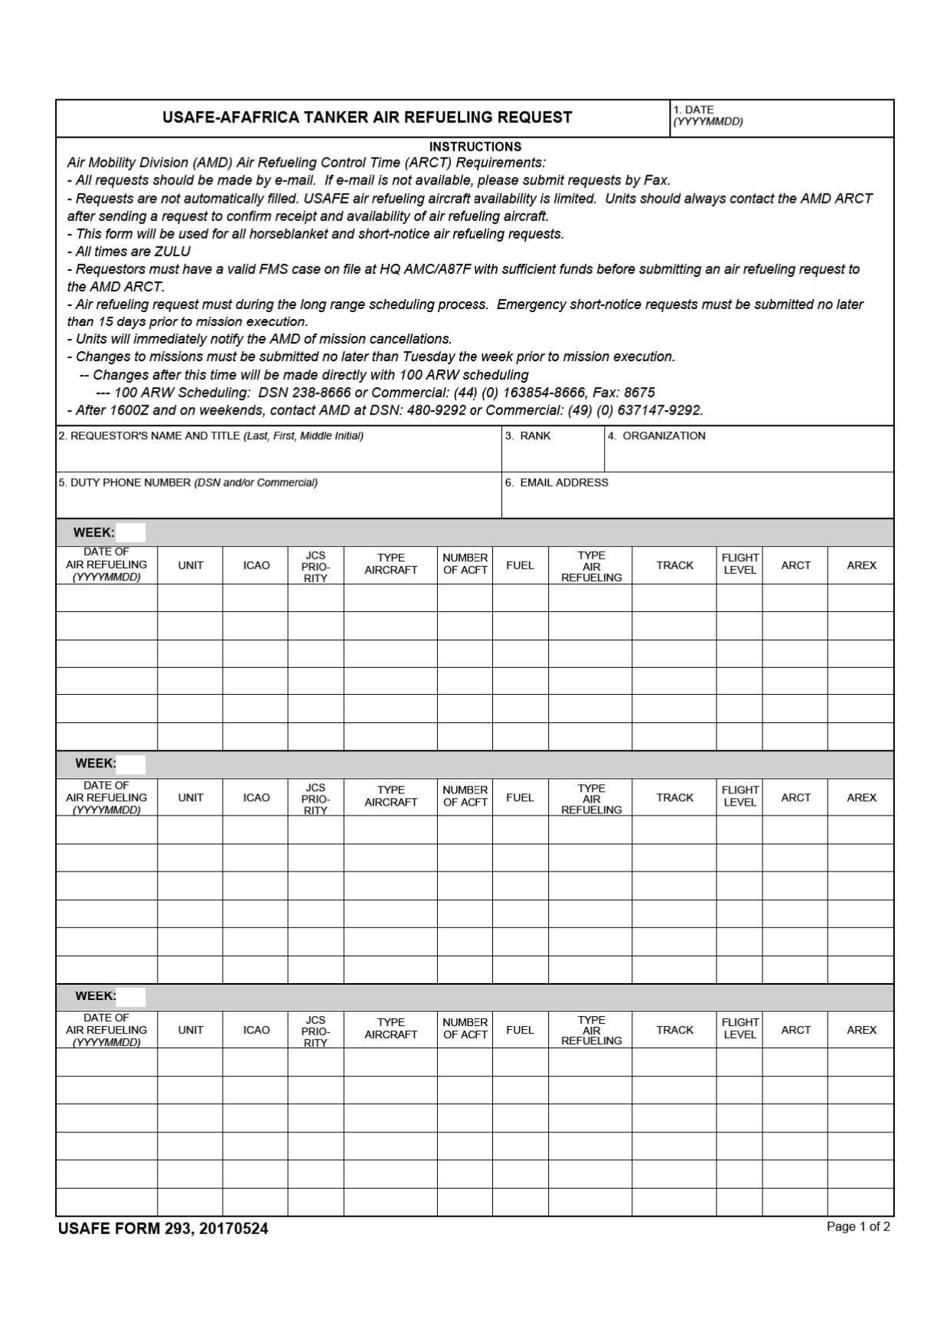 USAFE Form 293 Usafe-Afafrica Tanker Air Refueling Request, Page 1